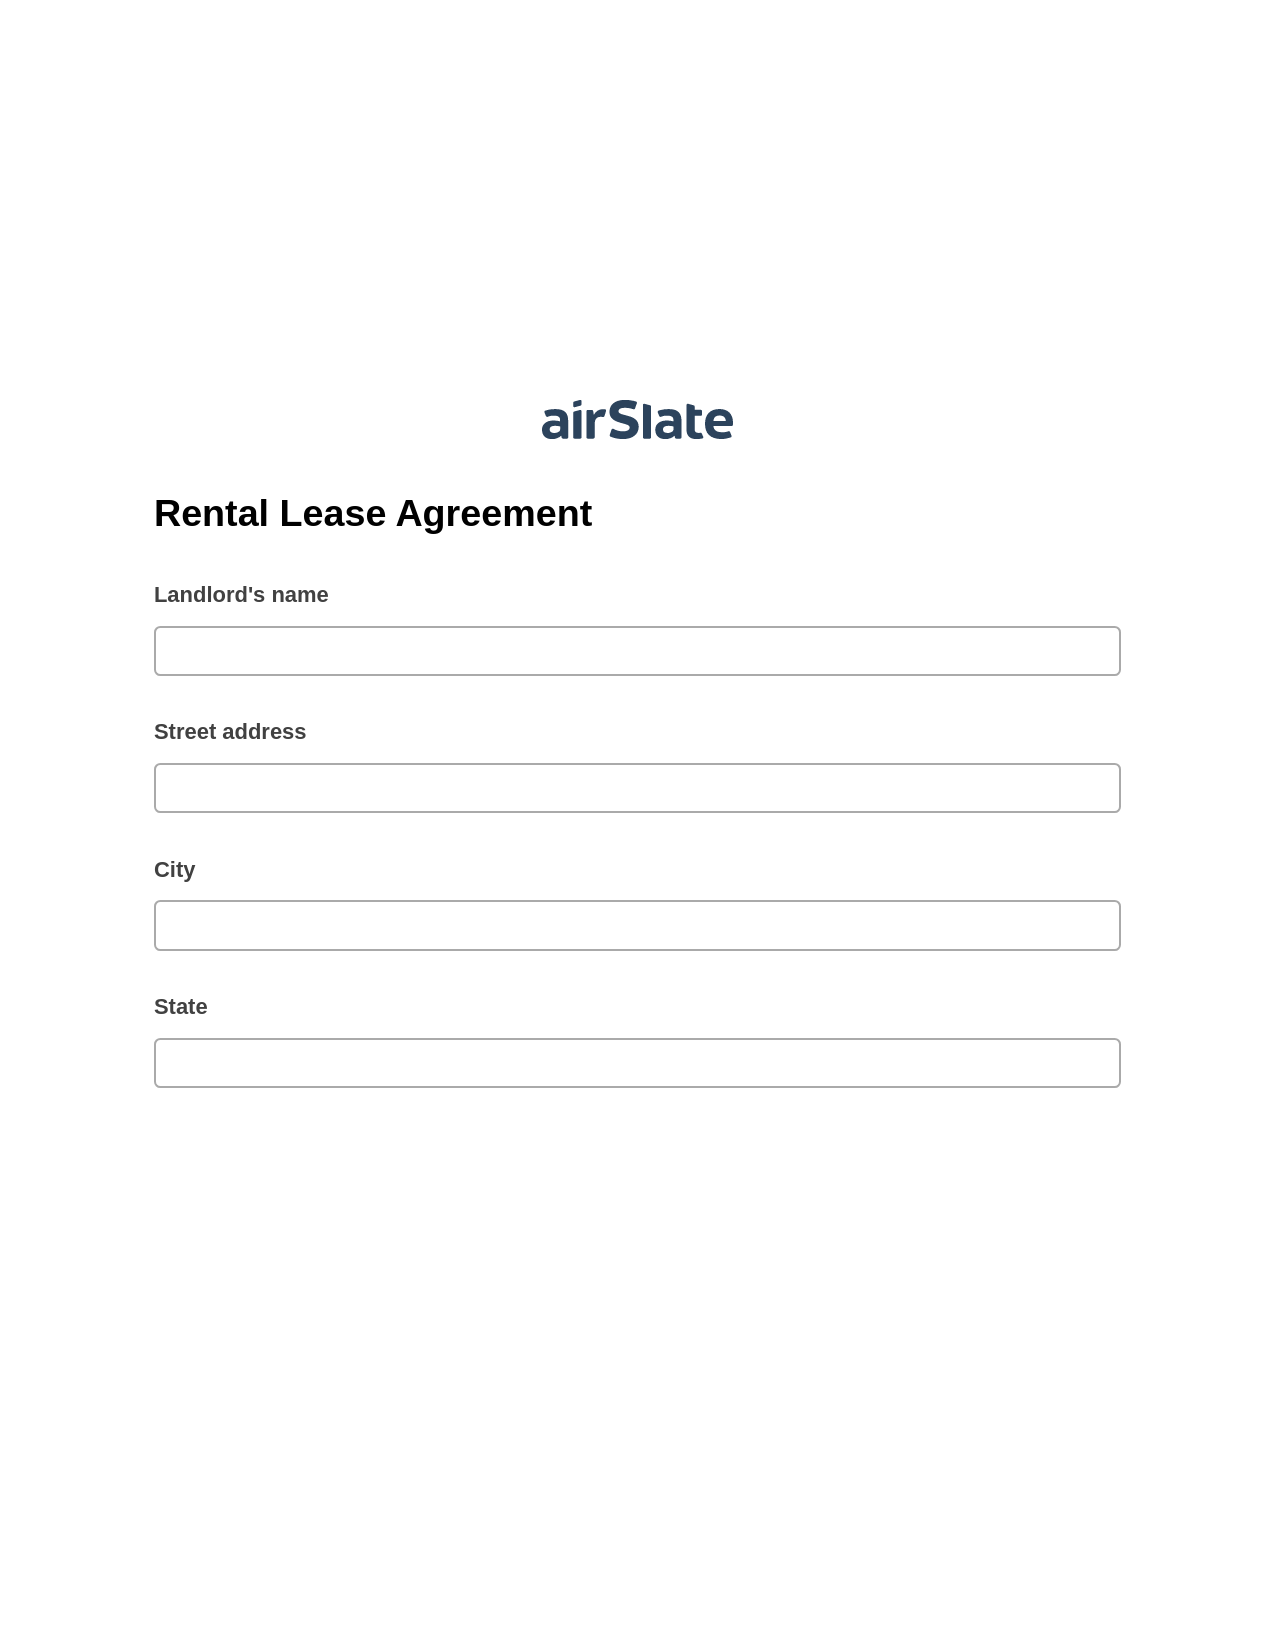 Rental Lease Agreement Pre-fill from CSV File Dropdown Options Bot, Create QuickBooks invoice Bot, Export to Formstack Documents Bot